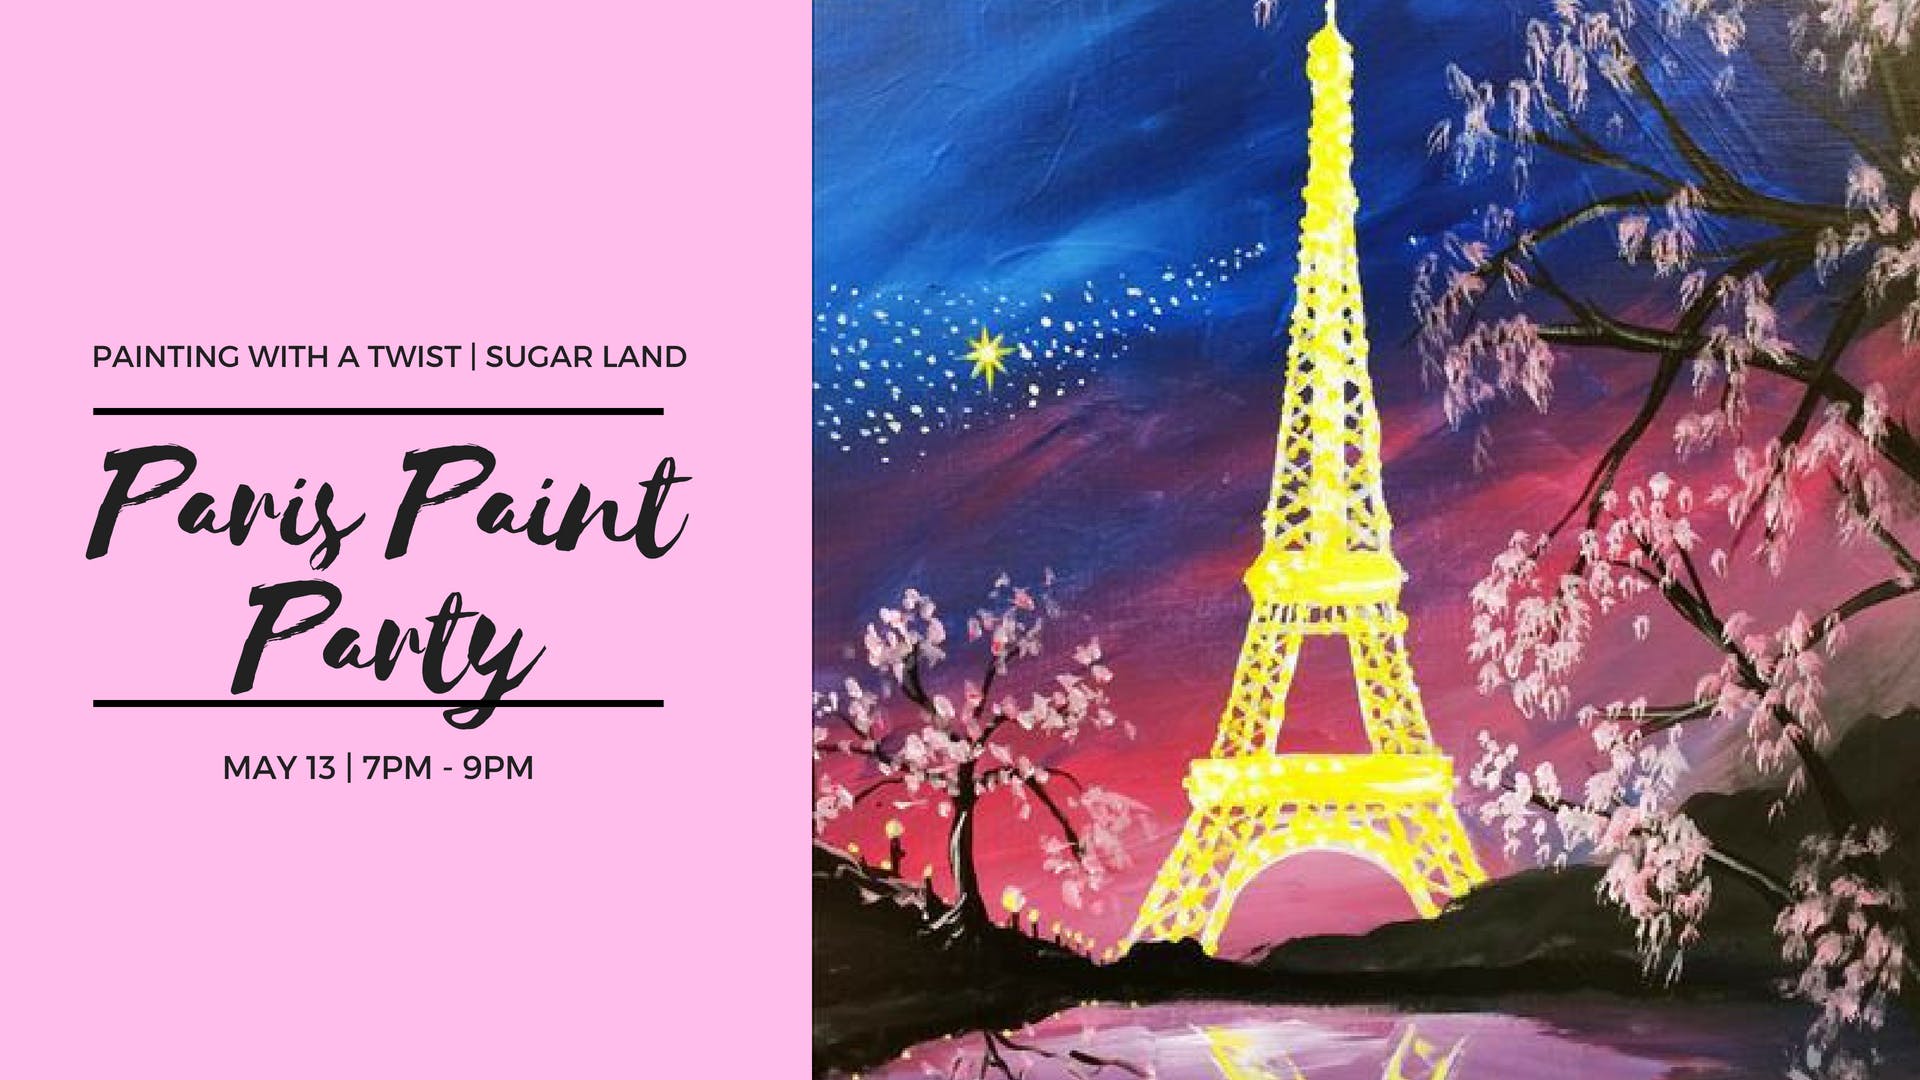 Paris Under The Pink Moon Paint Party May